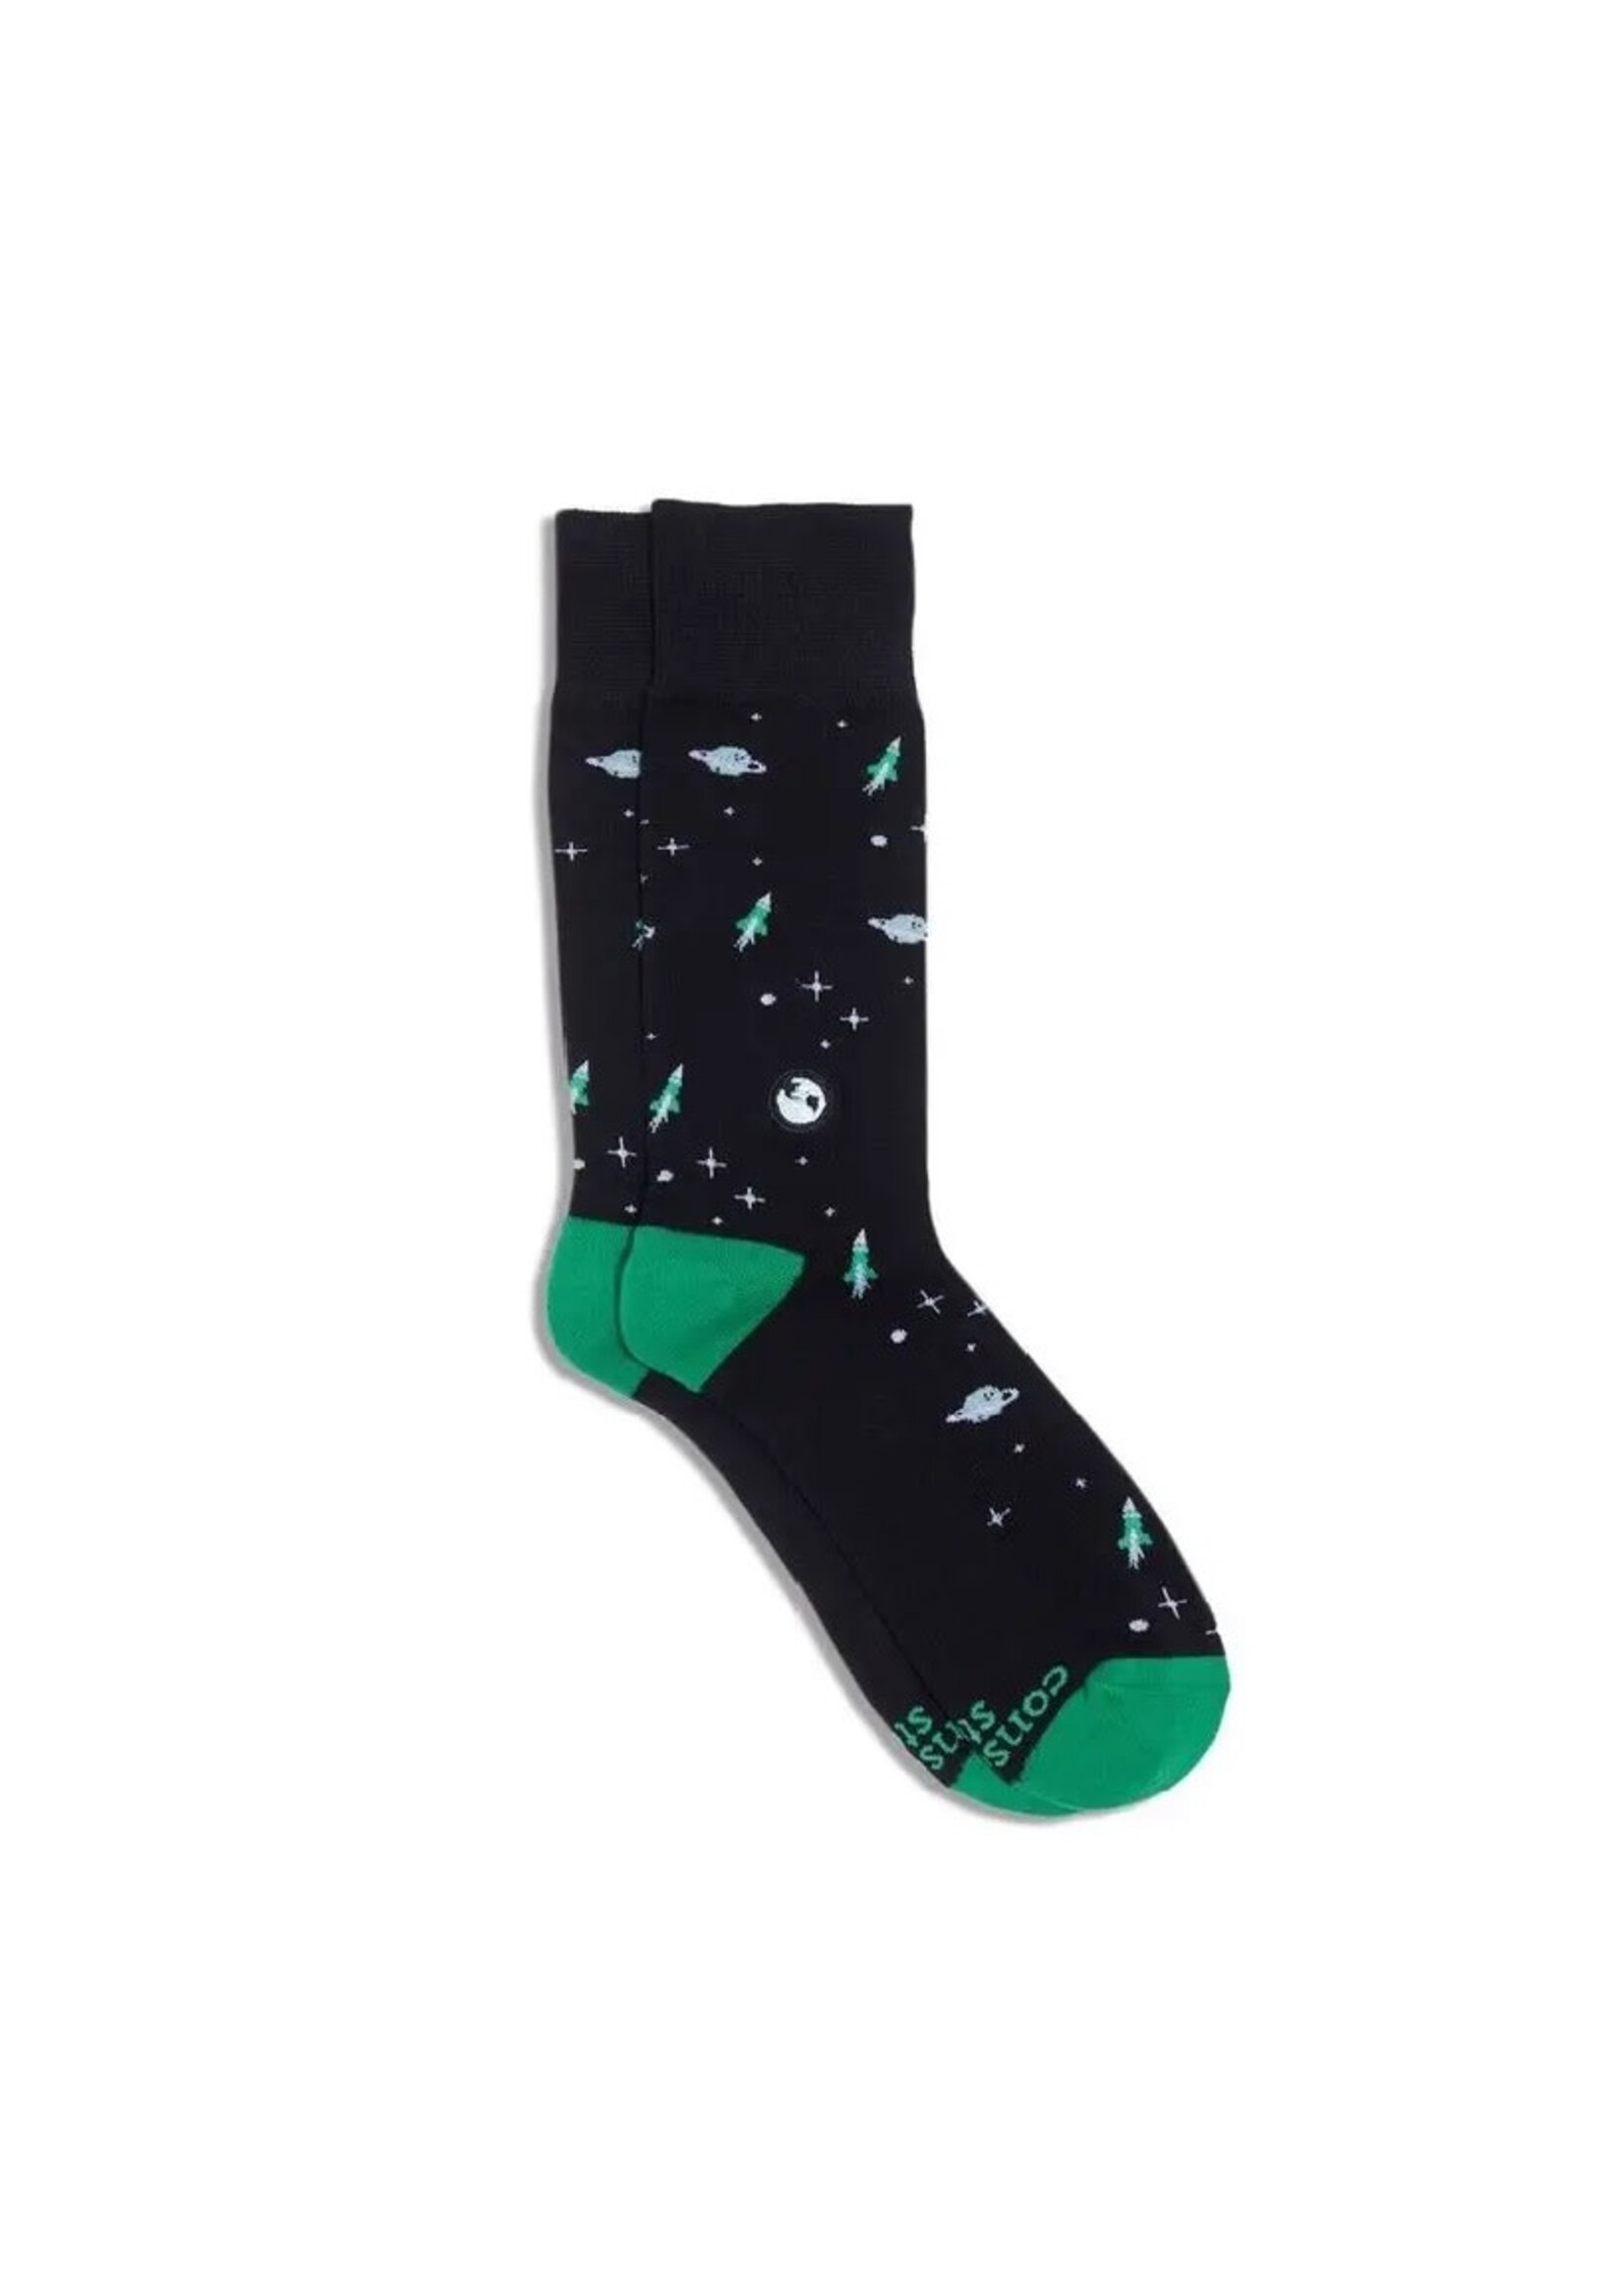 Socks - Protect our Planet Black Galaxy